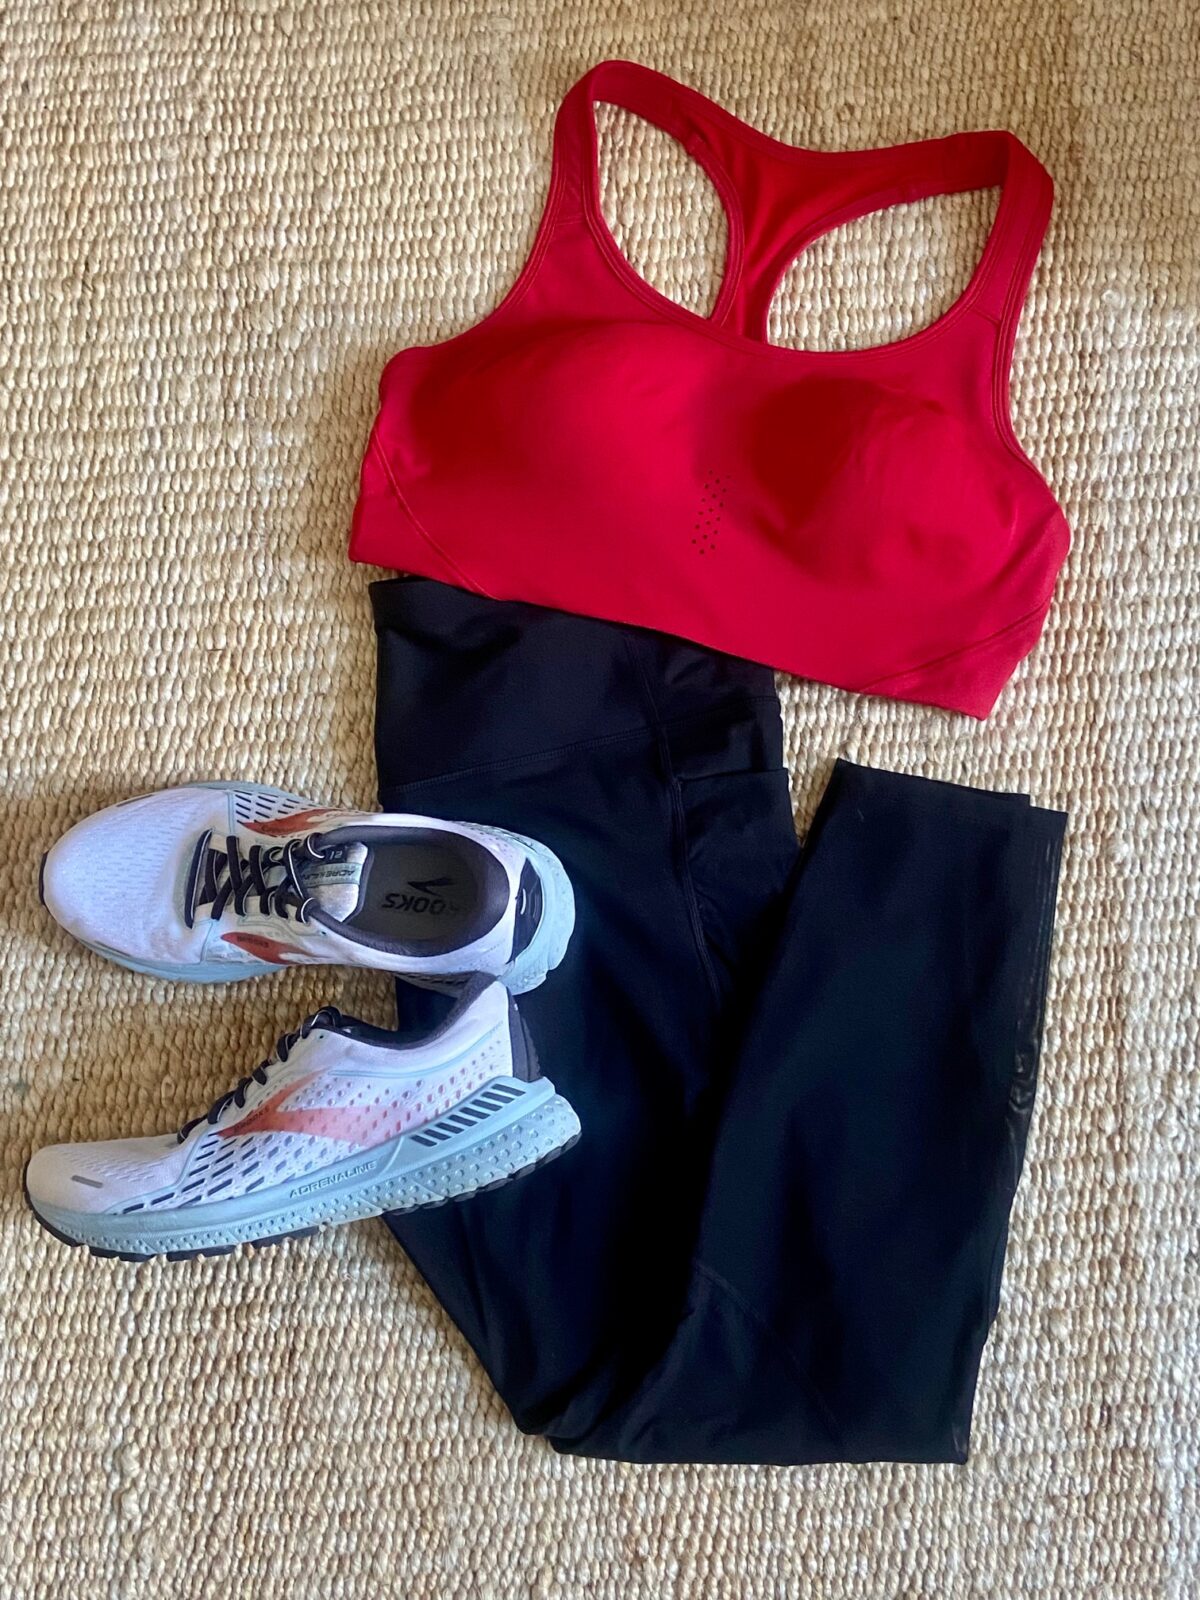 Insanely Affordable (And Good) Workout Wear